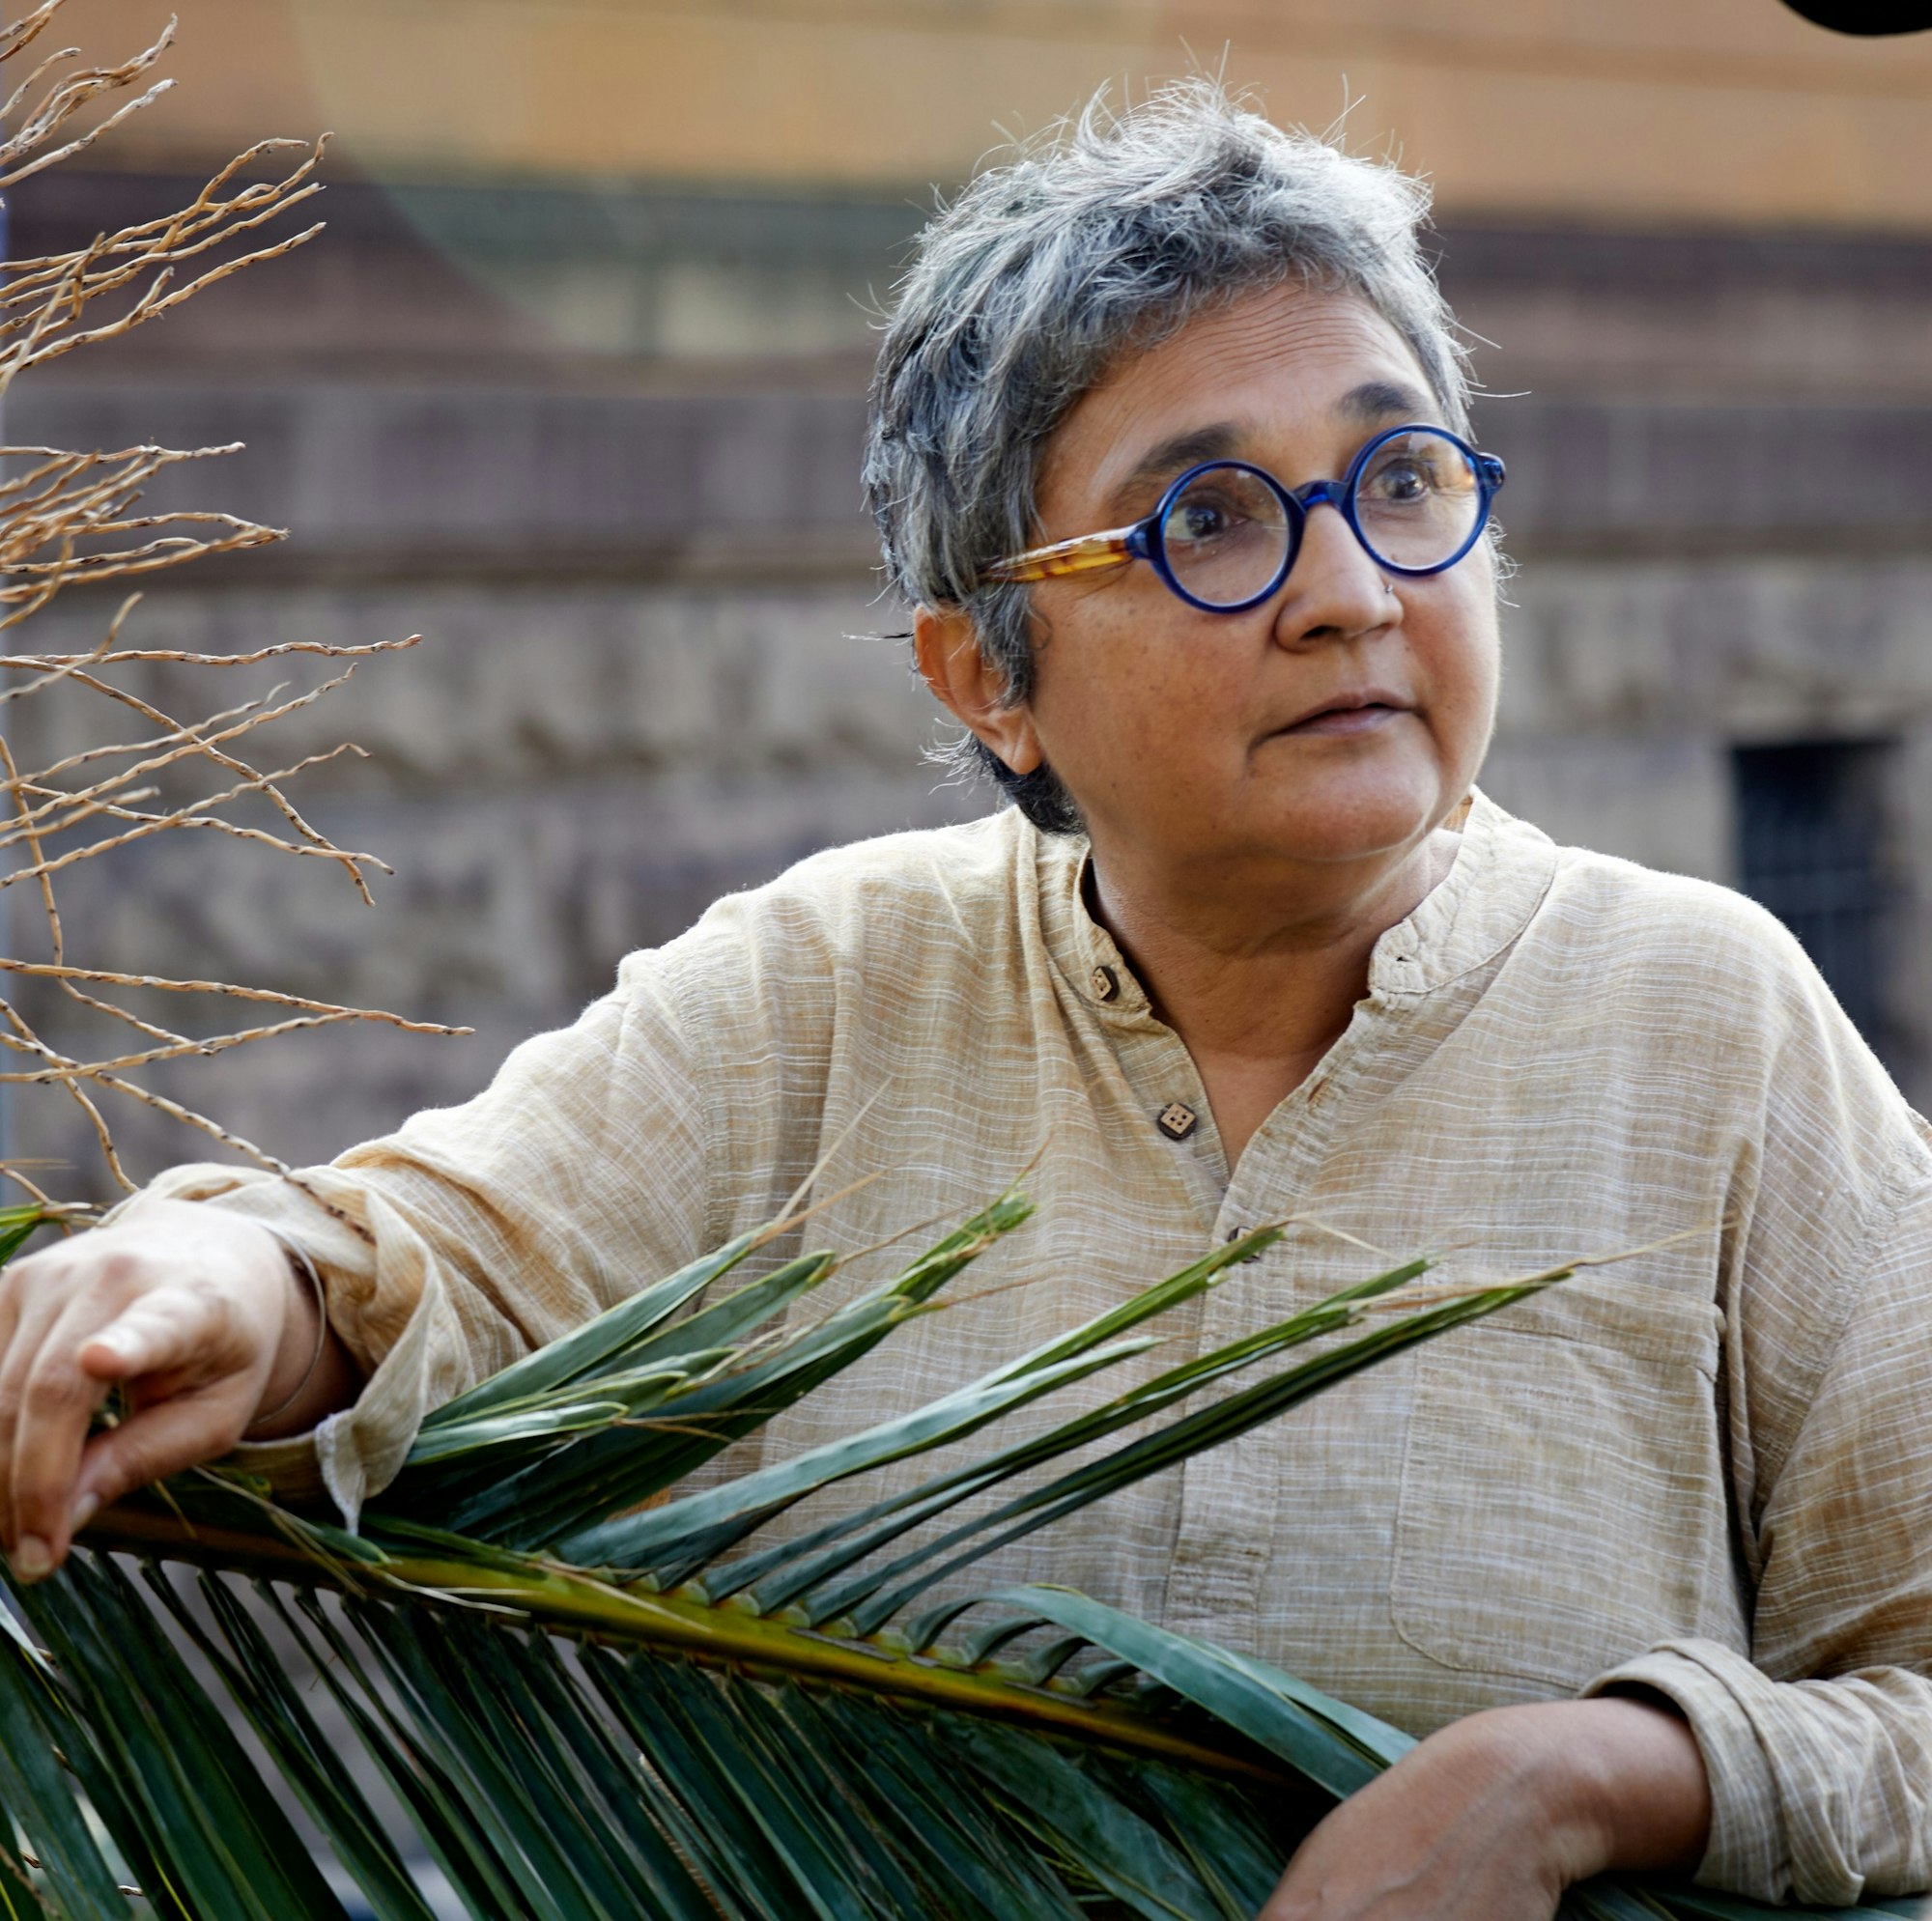 A person with short grey hair and round glasses holds a large palm leaf.